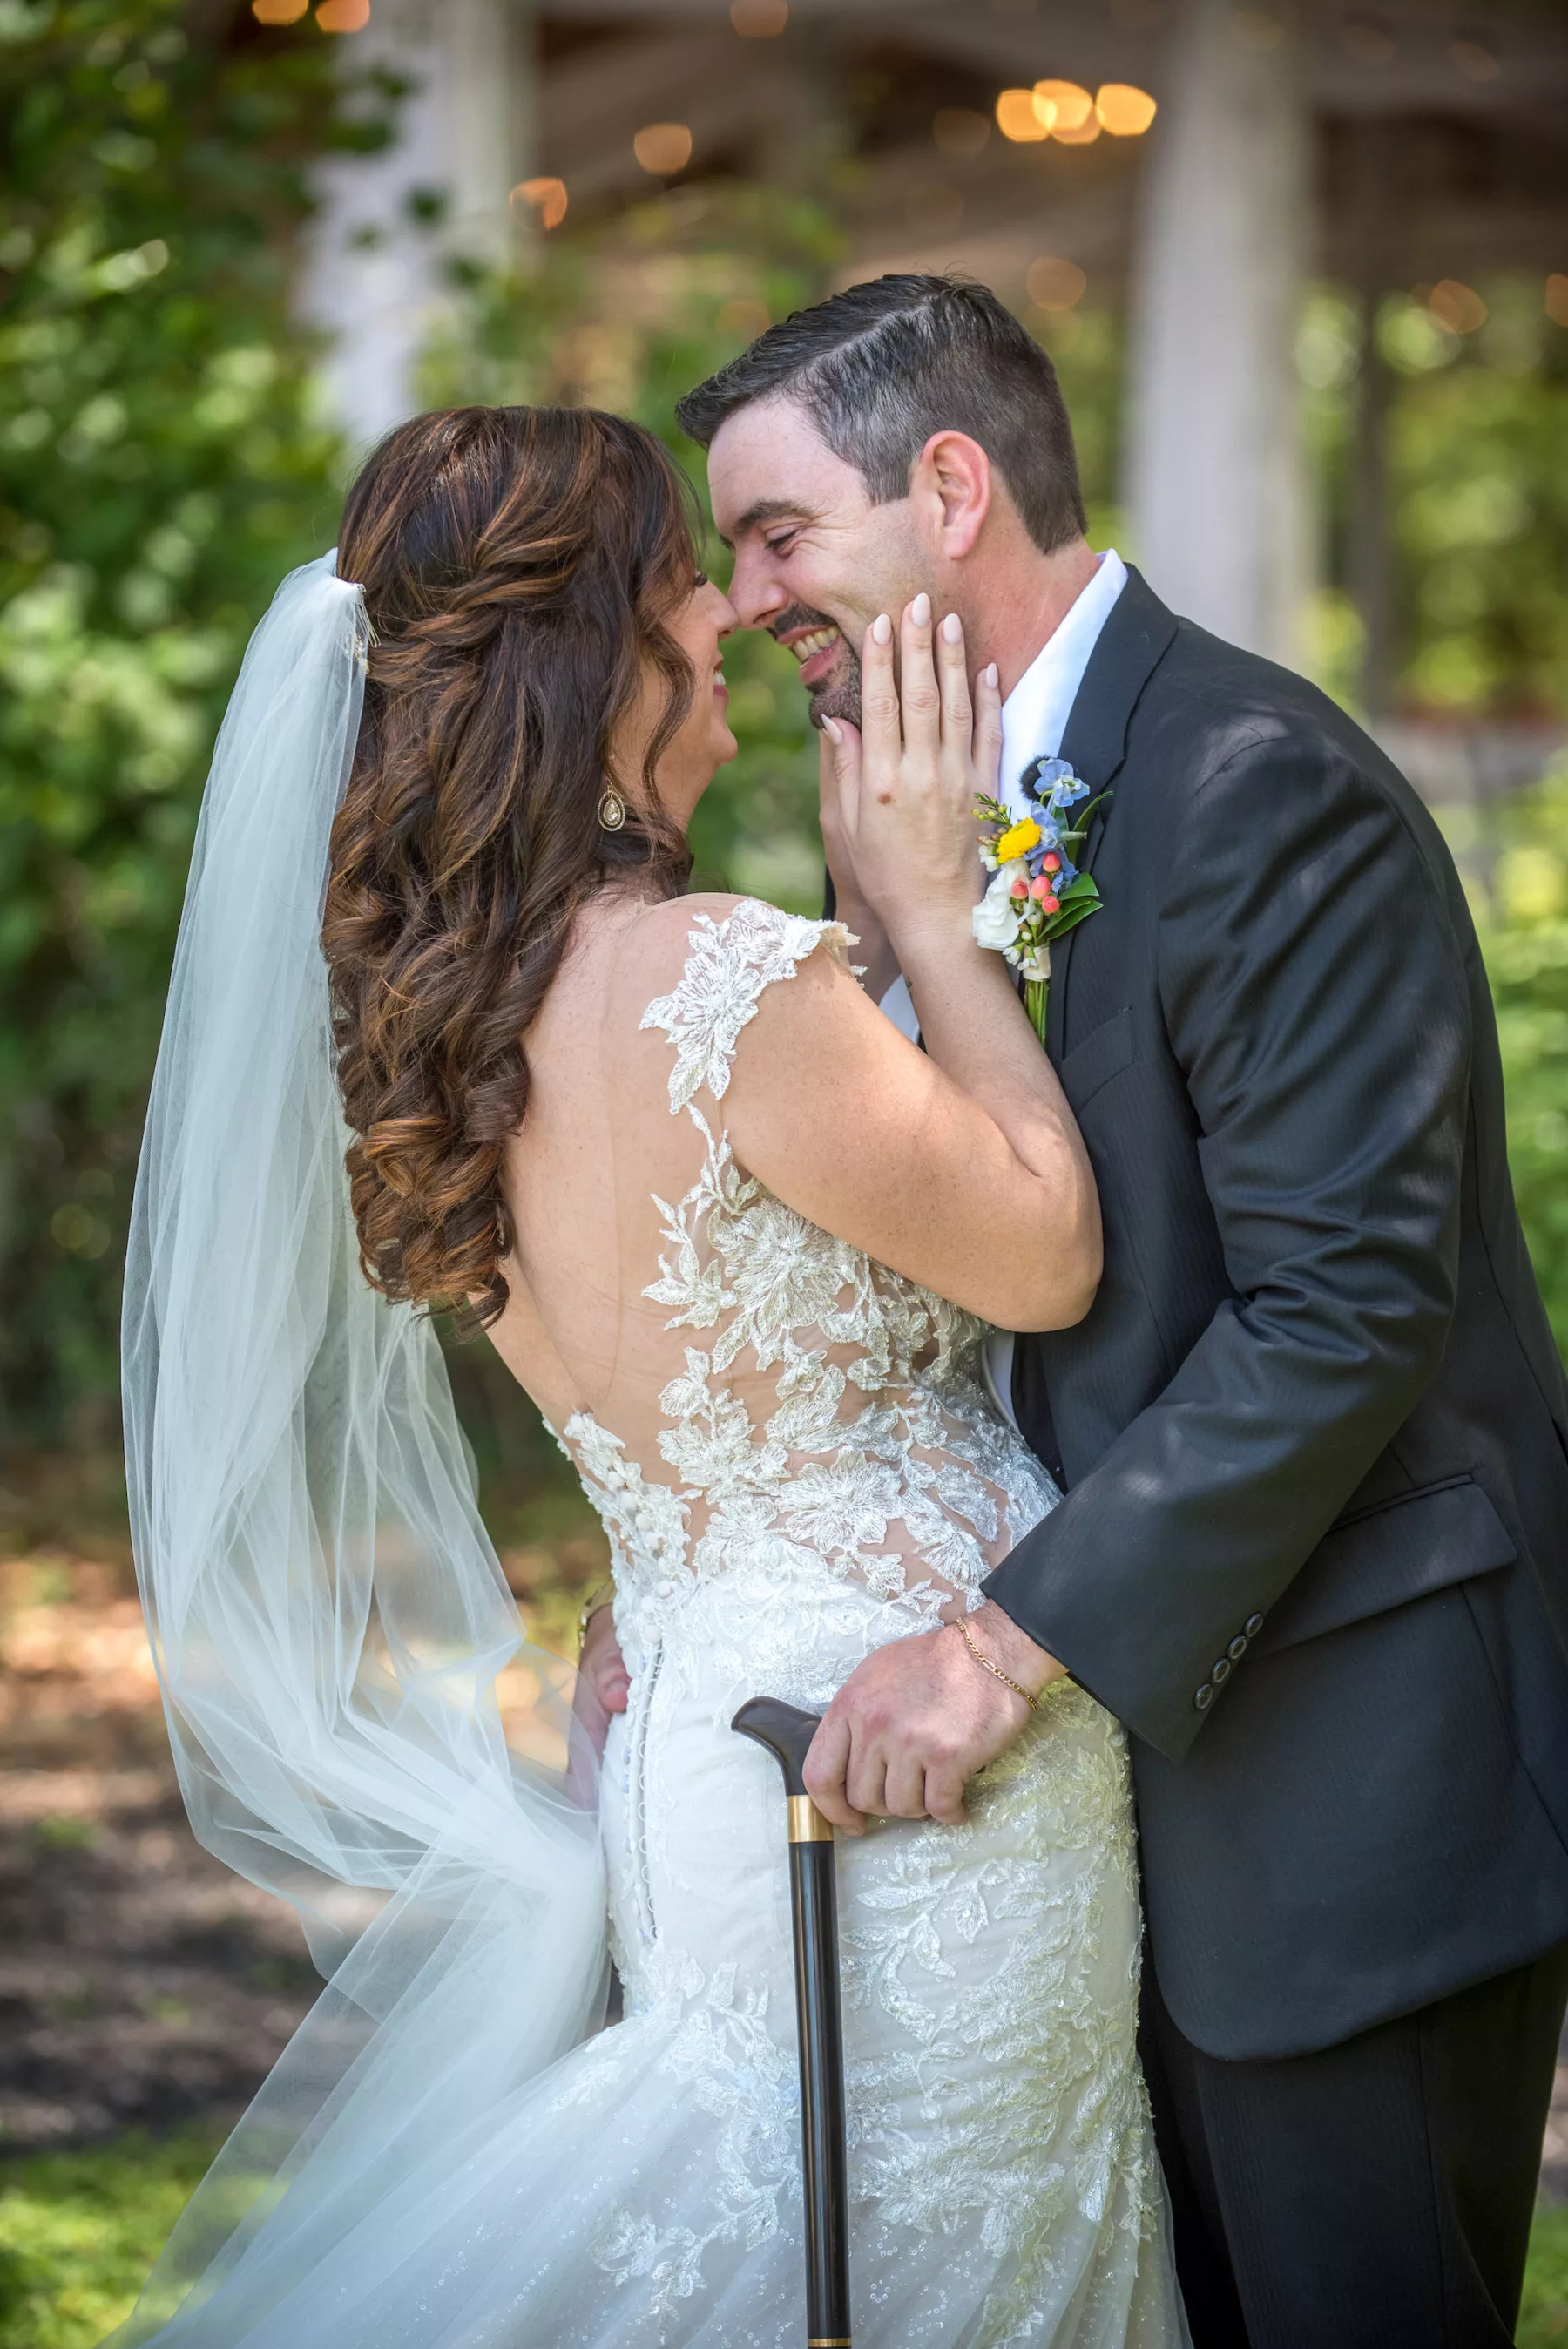 Bride and Groom Just Married Wedding Portrait | Ivory Lace Illusion Open Back Mermaid Wedding Dress Ideas | Elegant Half Up Half Down Bridal Hair Inspiration | Tampa Bay Hair and Makeup Artist Michele Renee The Studio